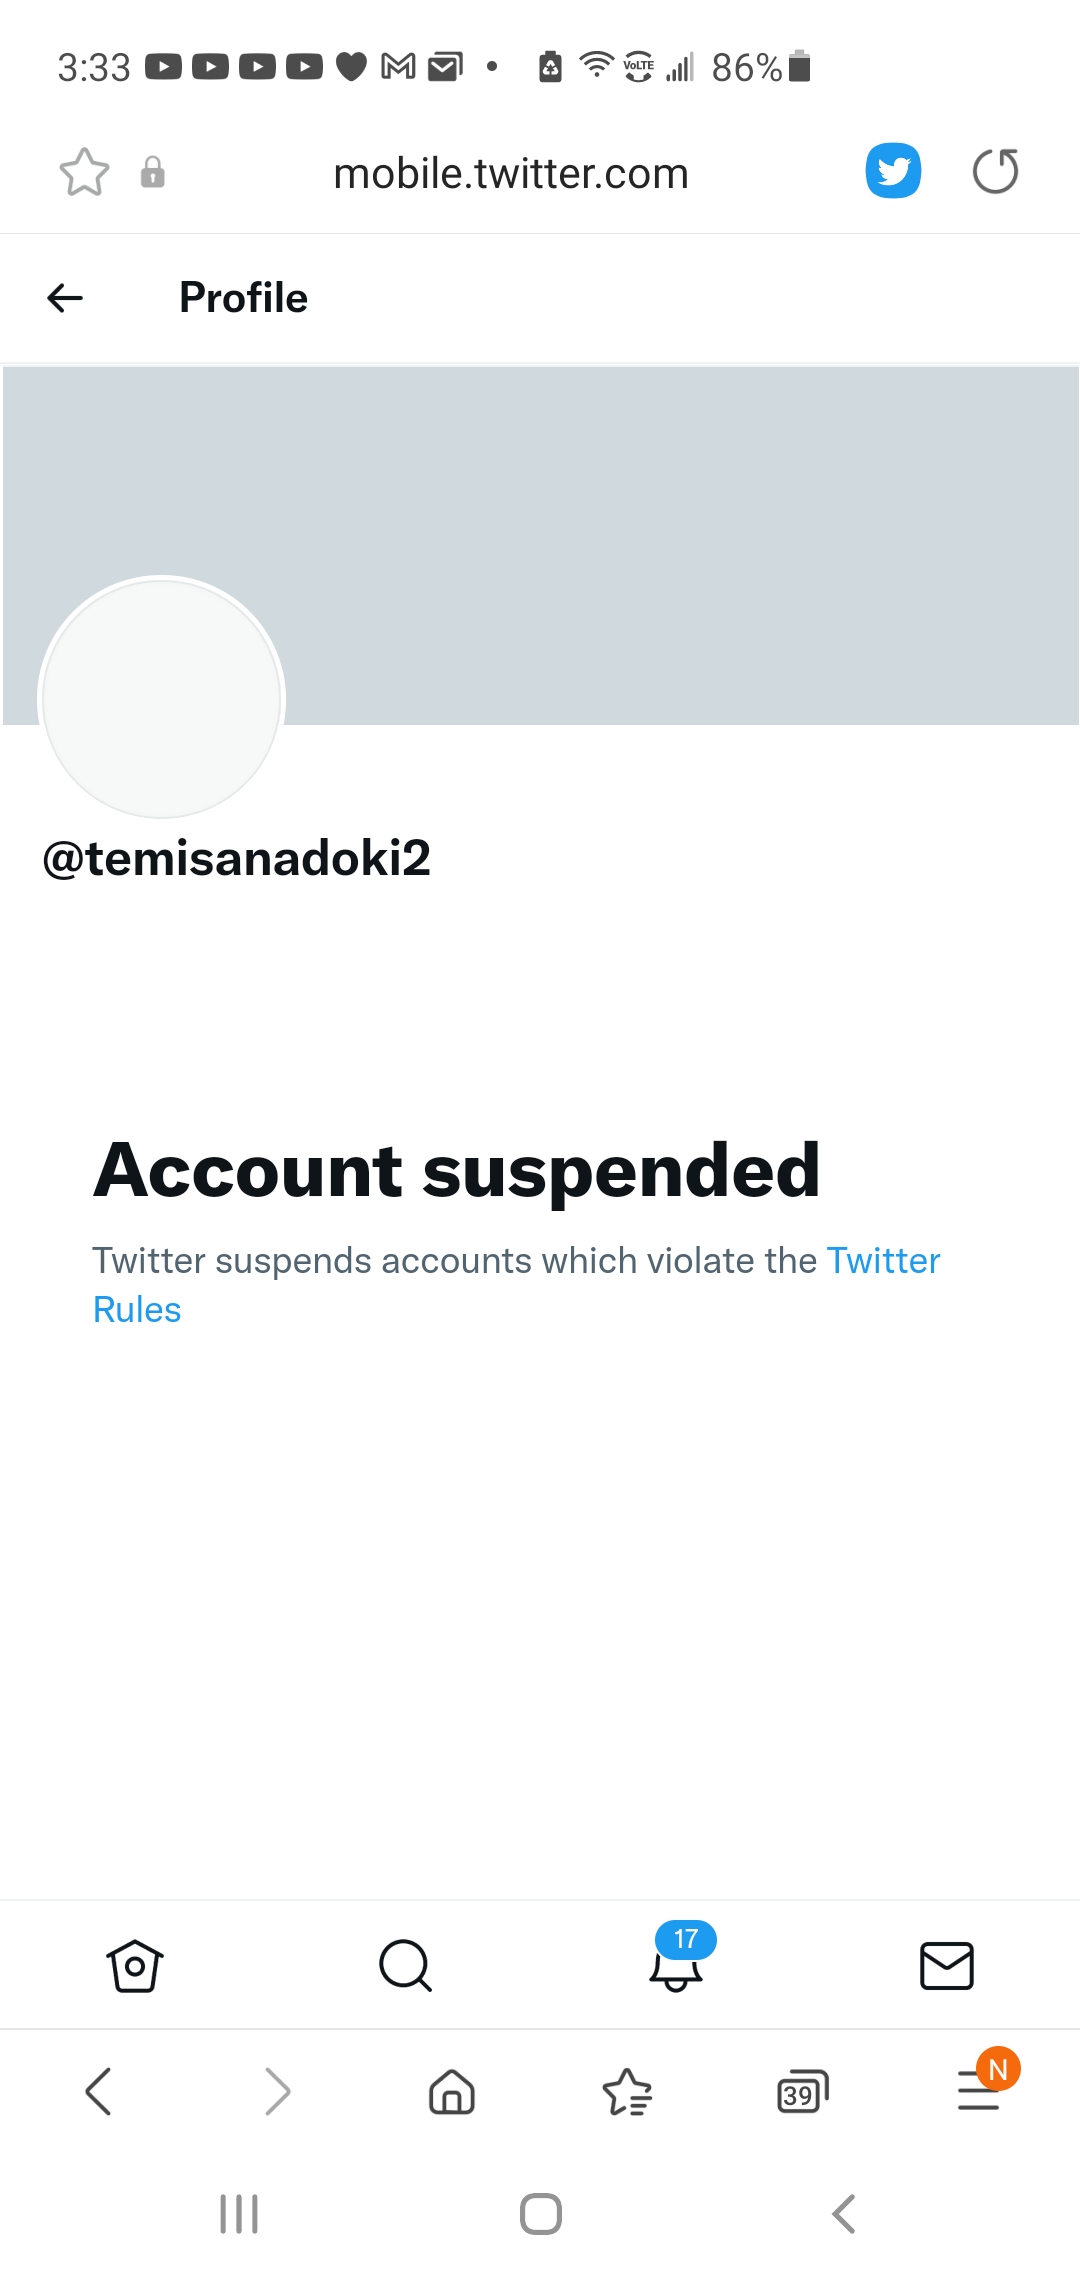 I got the account permanently suspended (lol).